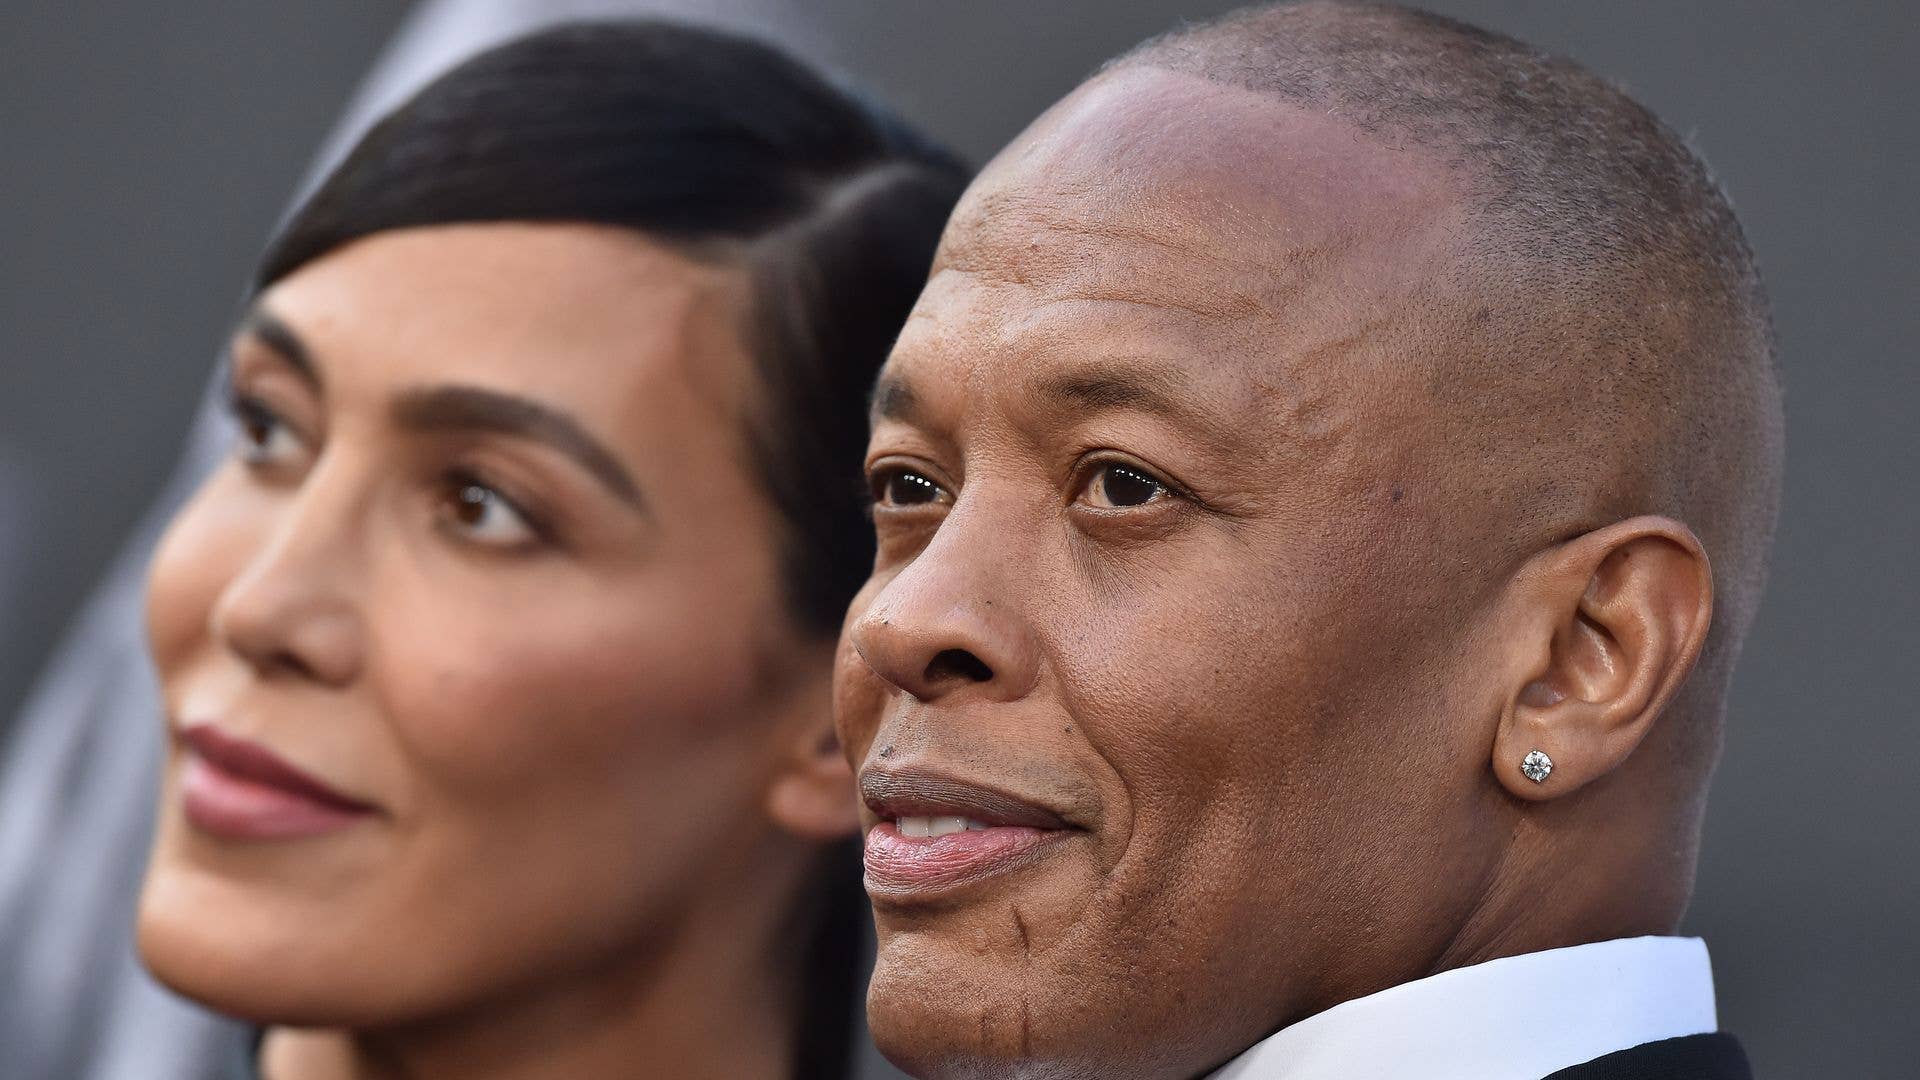 Dr. Dre with Nicole Young at 'The Defiant Ones' premiere